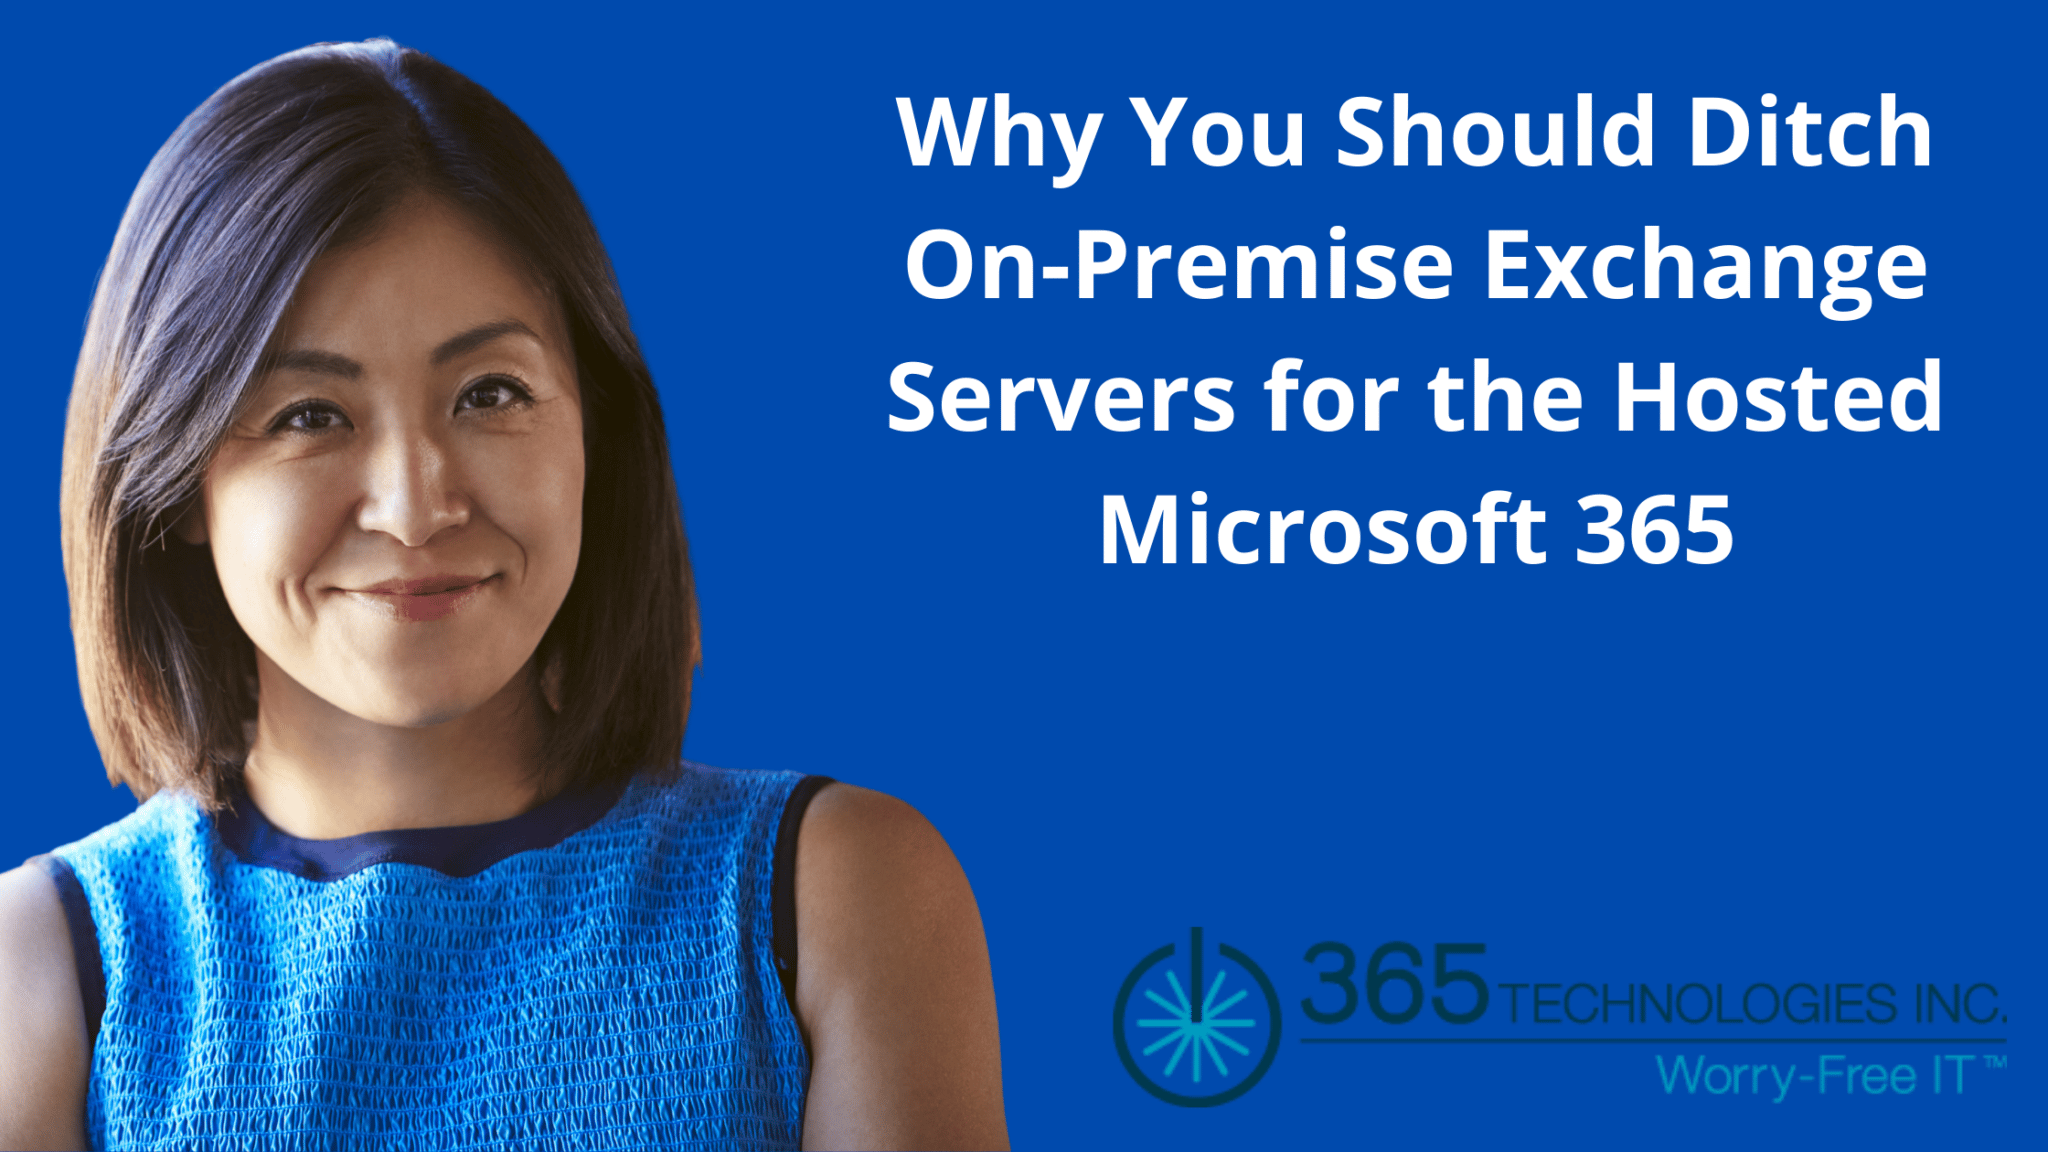 Ditch On Premise Exchange Servers for the Hosted Microsoft 365